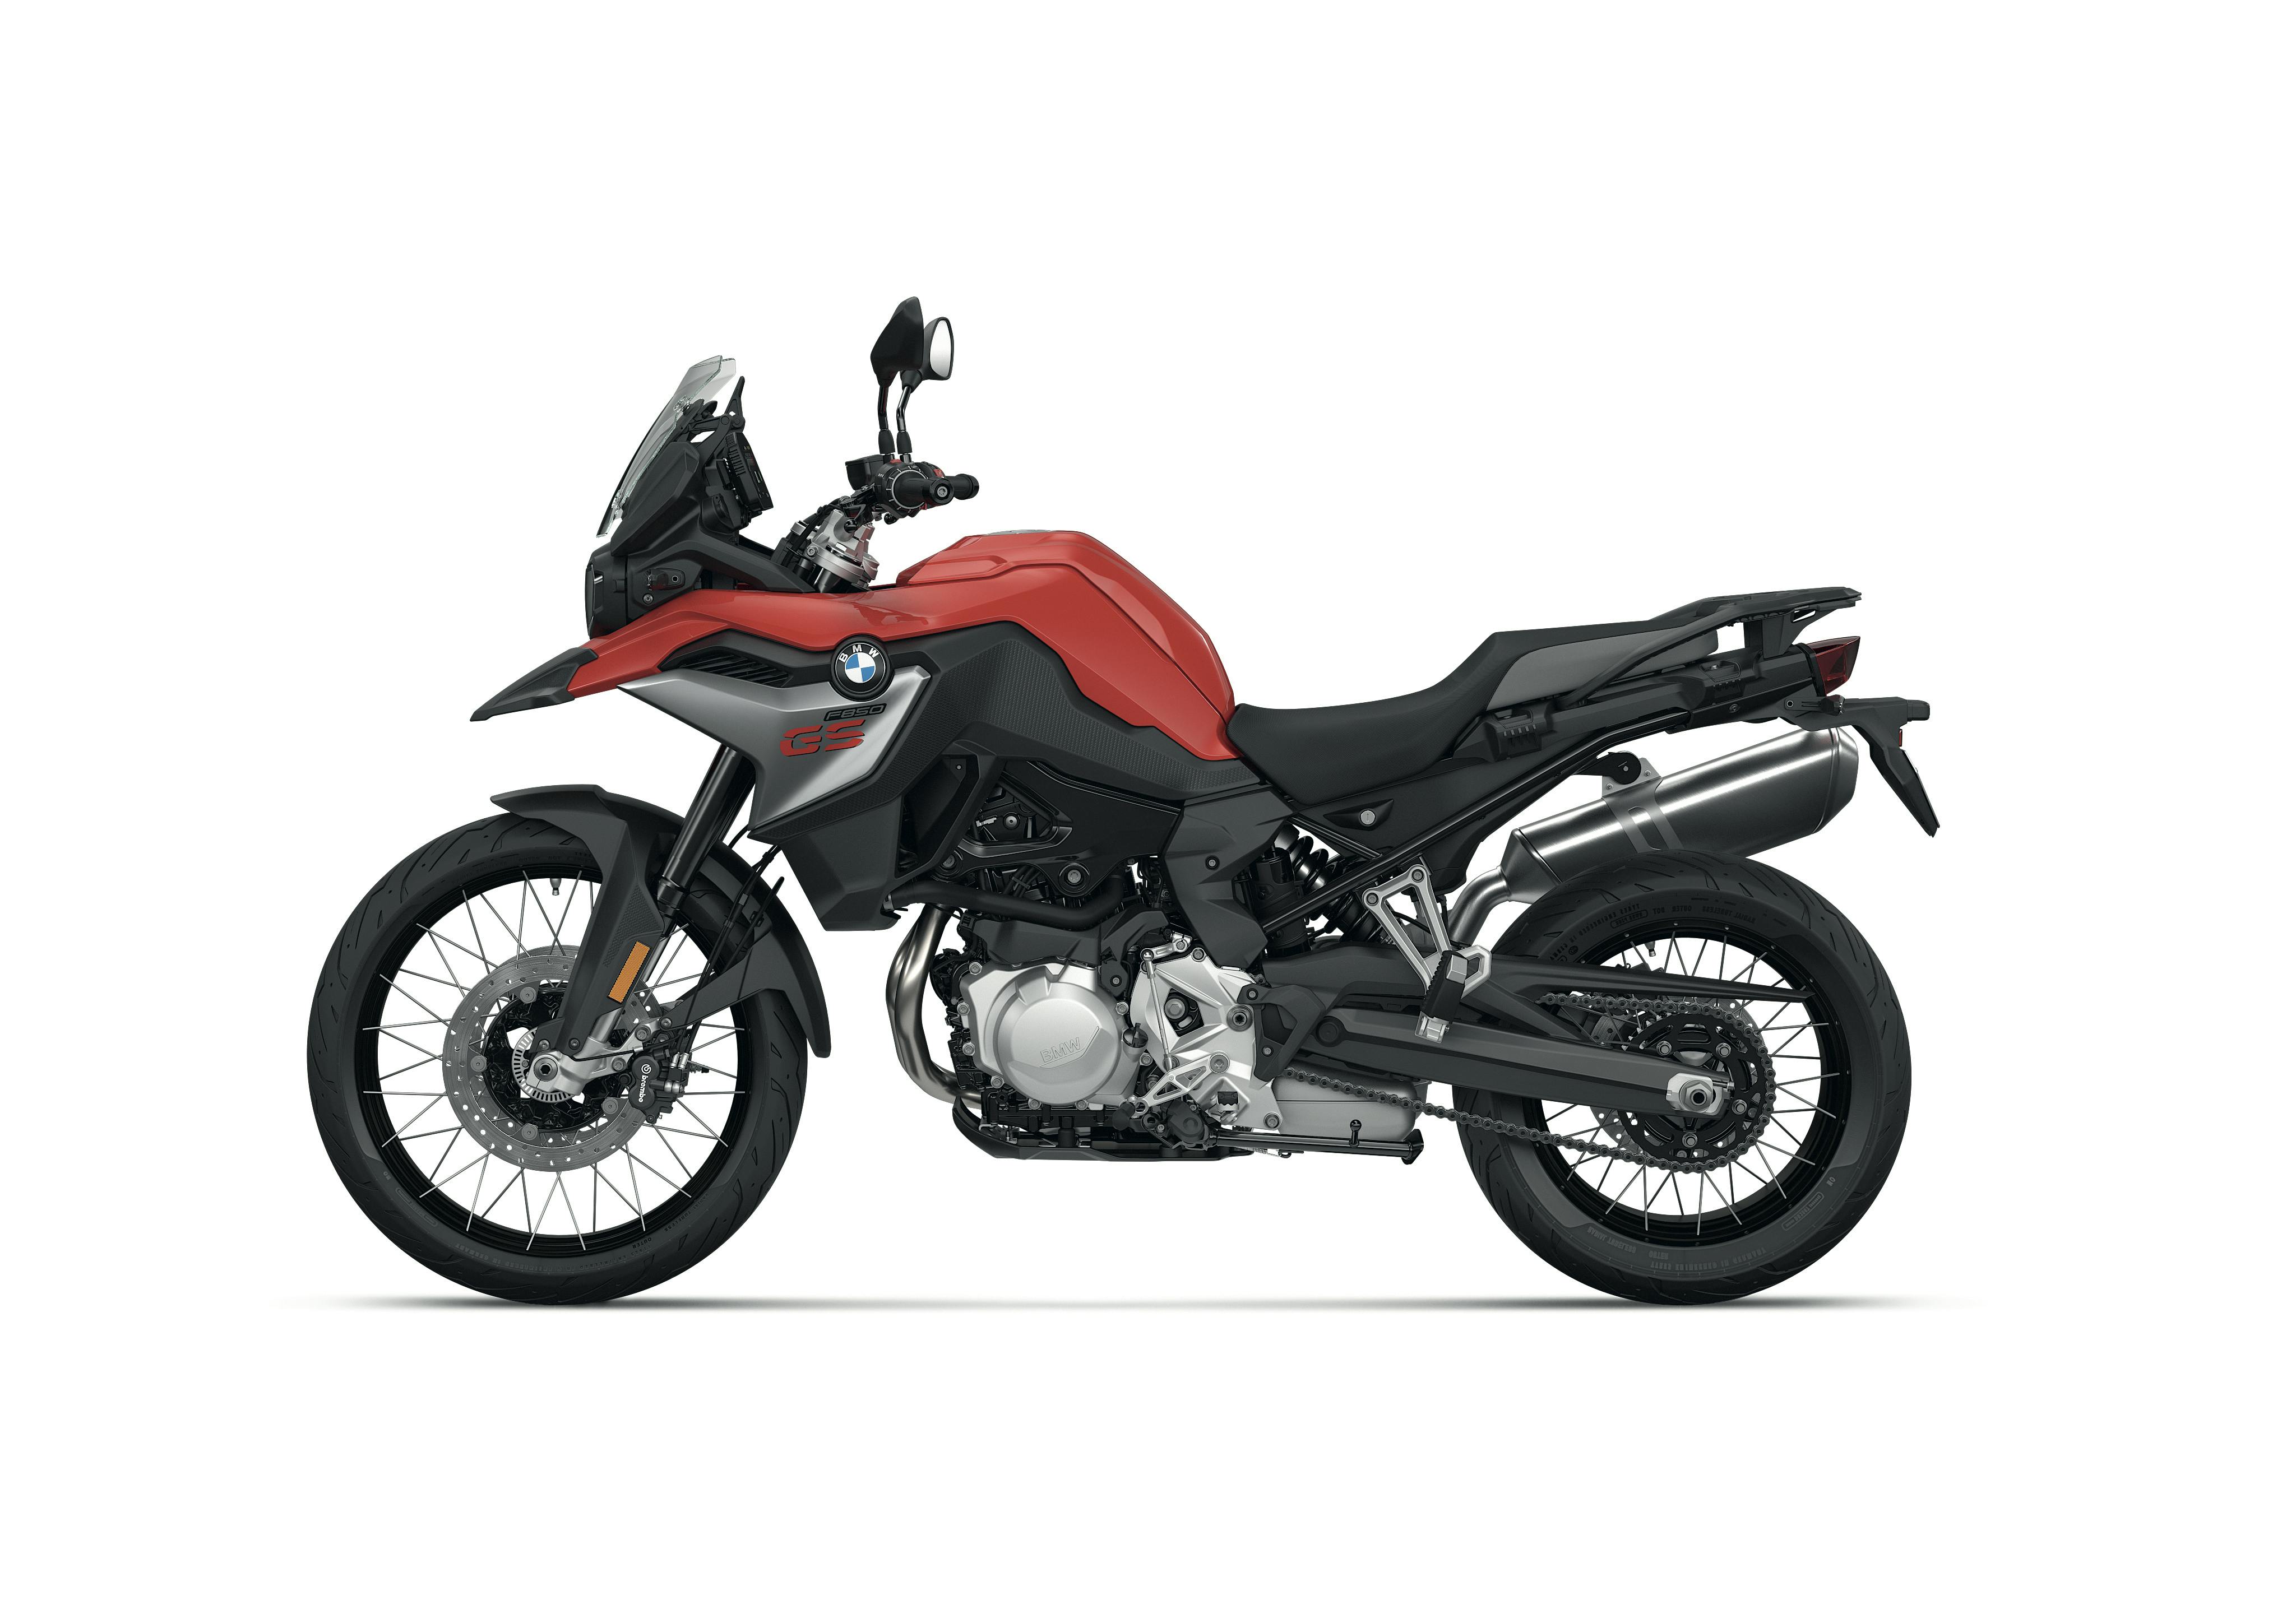 BMW F 850 GS racing red colour